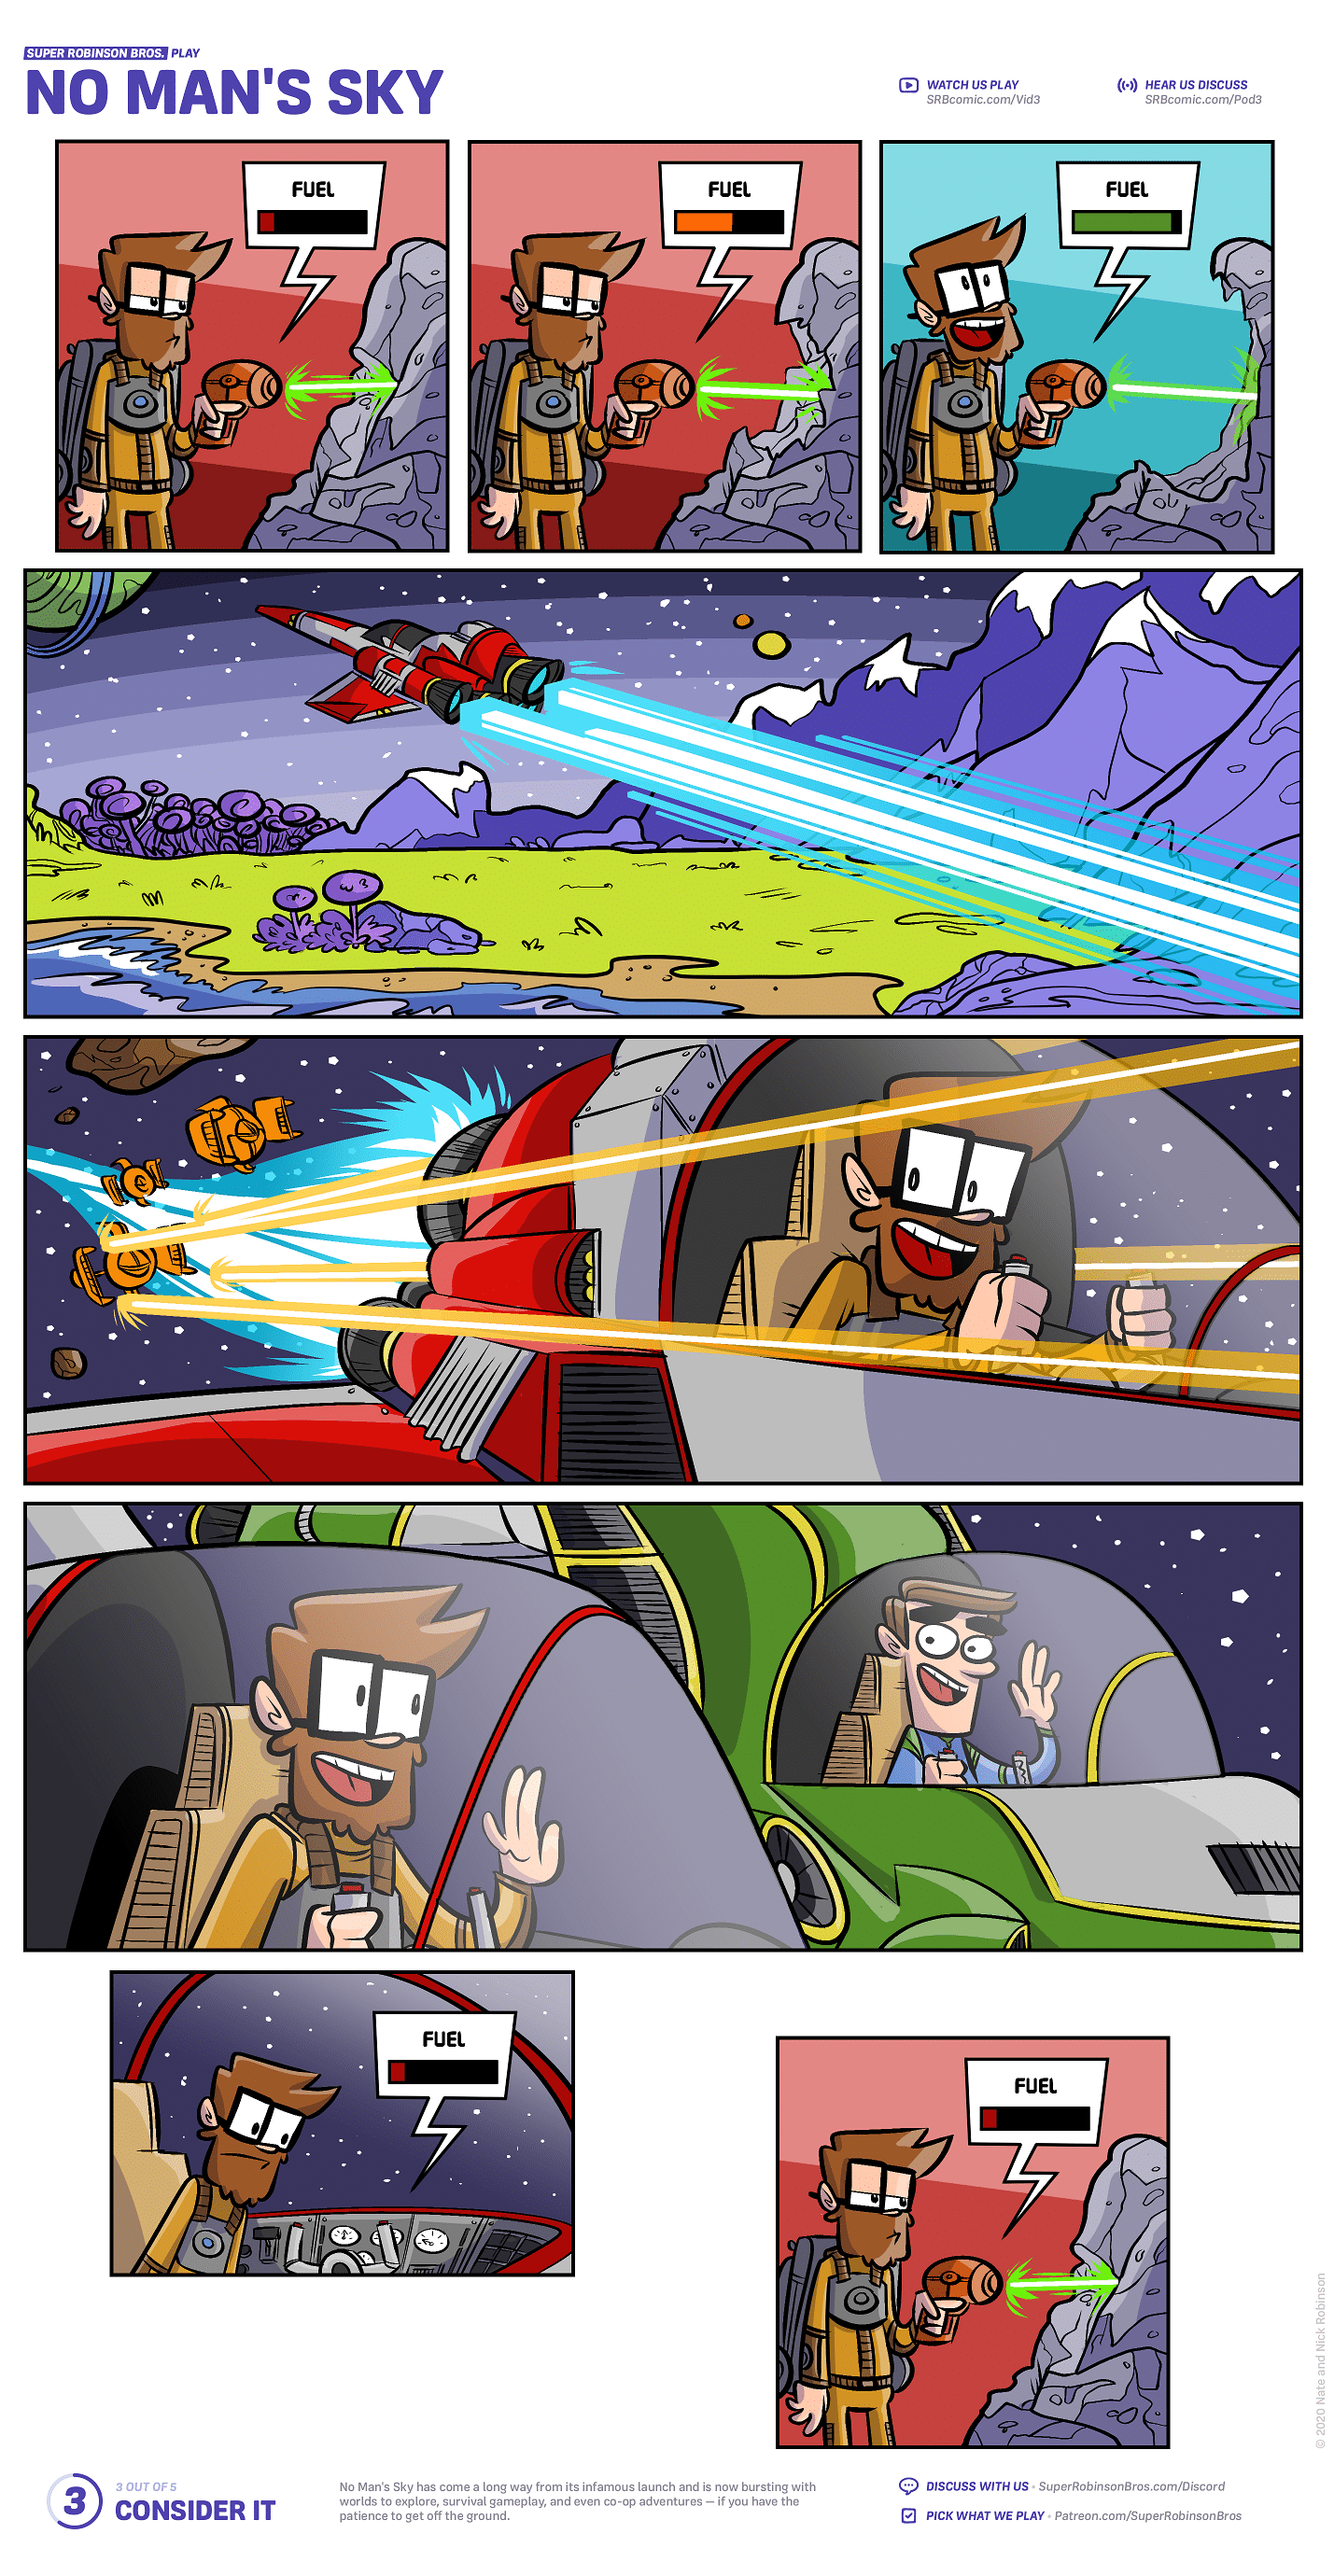 No mans sky review (from plaidtopia), No Mans Sky Comics No mans sky review (from plaidtopia), No Mans Sky text: SUPER ROBINSON BROS. NO MÅN'S SKY FUEL FUEL FUEL @ WATCH us PLAY SRBcomic.com/Vid3 FUEL HEAR US DISCUSS SRBcomic.com/Pod3 FUEL 3 our OFS CONSIDER IT No Man's Sky has come a long way from its infamous launch and is now bursting with worlds to explore, survival gameplay, and even co-op adventures — if you have the patience to get off the ground. @ DISCUSS WITH US • superRobinsonBros.com/Discord @ PICK WHAT WE PLAY Patreon.com/SuperRobinsonBros 